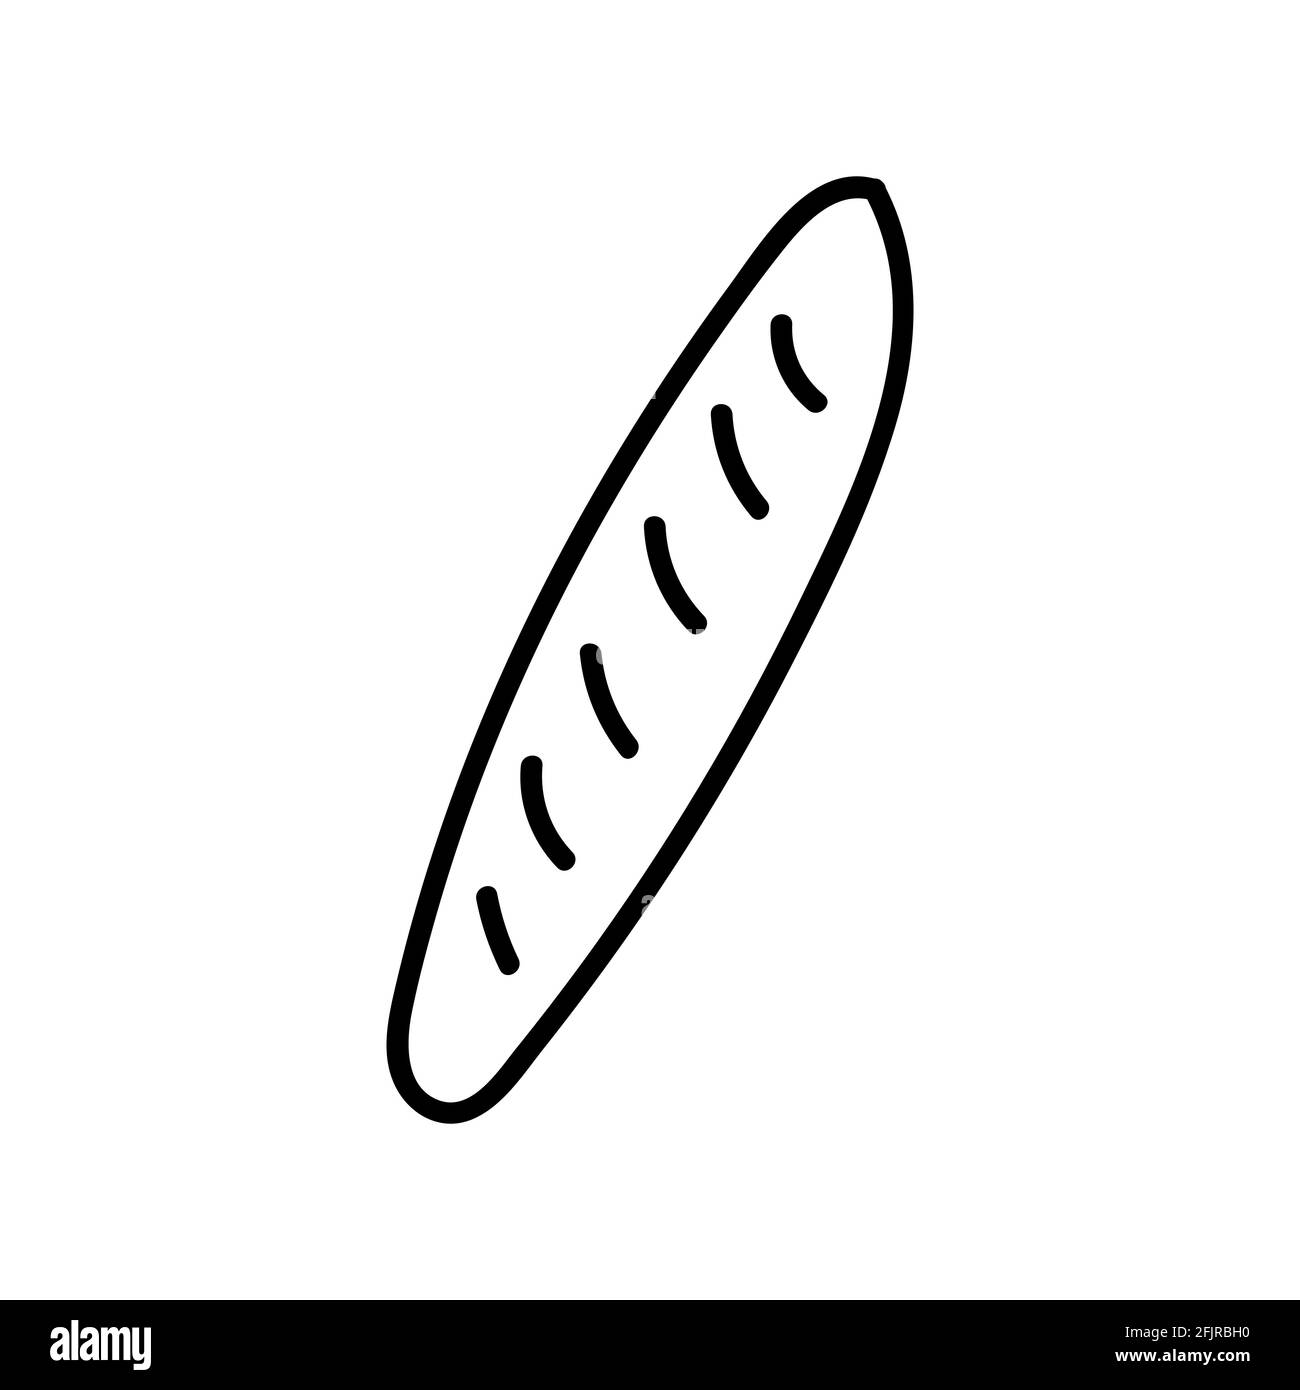 French baguette. Hand drawn doodle vector illustration isolated on whithe background. Simple drawings with black color. Stock Vector